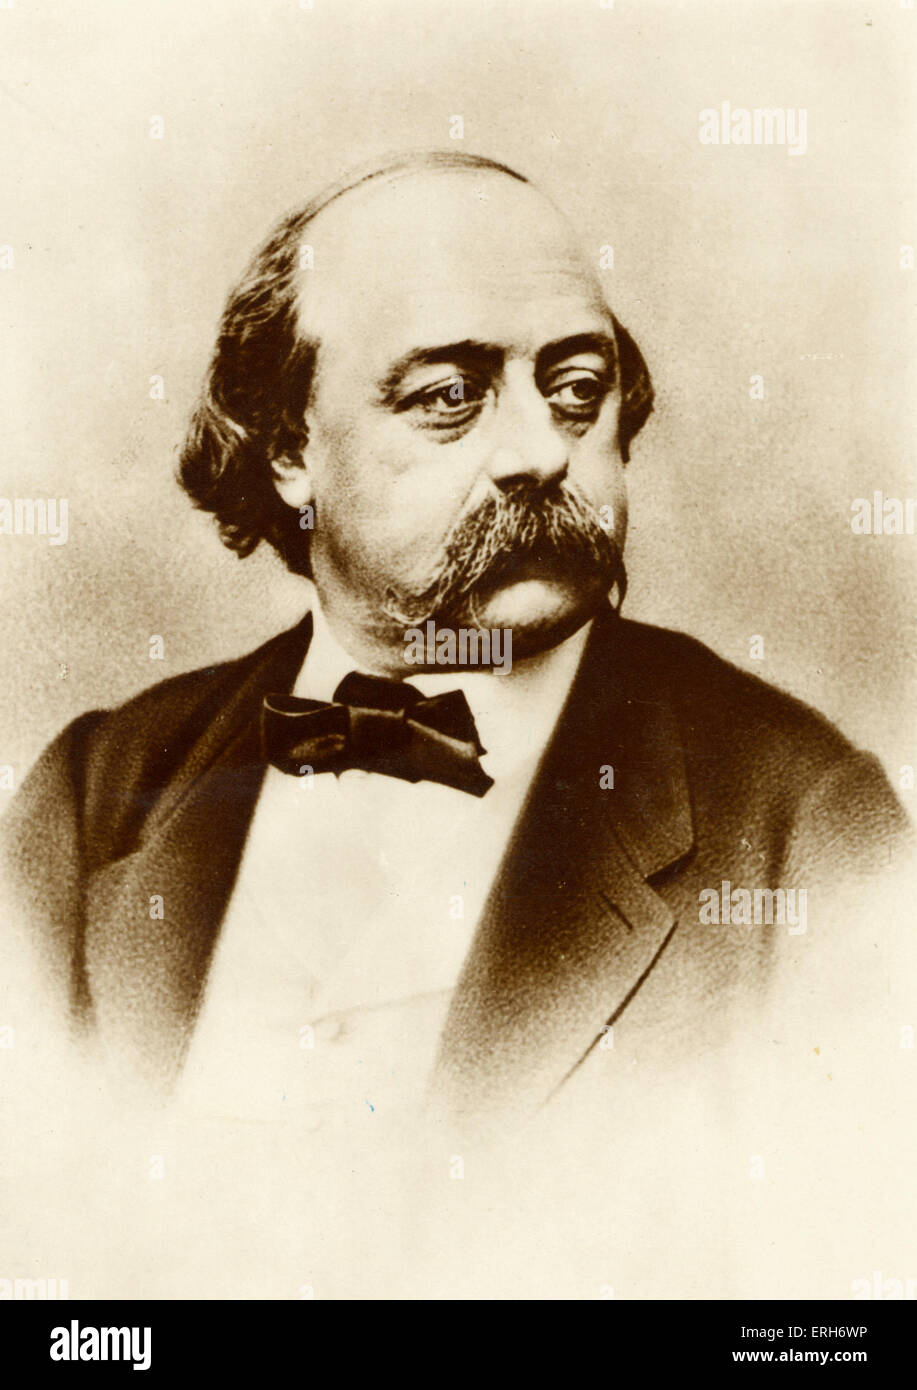 Gustave Flaubert - portrait of the French novelist, 12 December 1821- 8 May 1880. Stock Photo